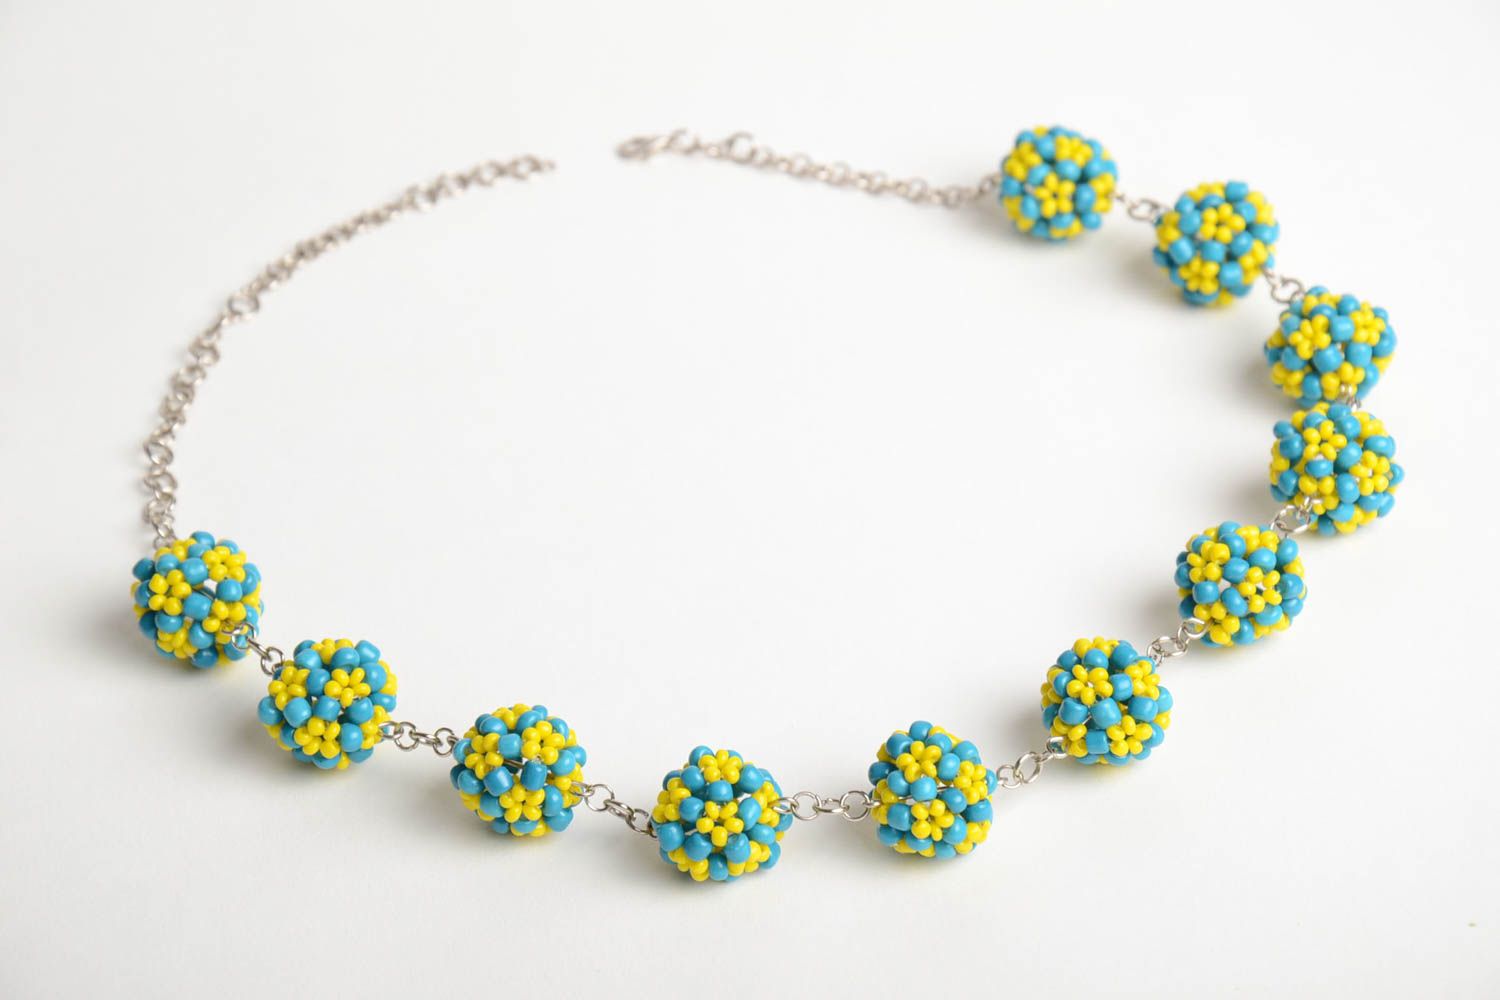 Handmade designer necklace with metal chain and bead woven blue and yellow balls photo 3